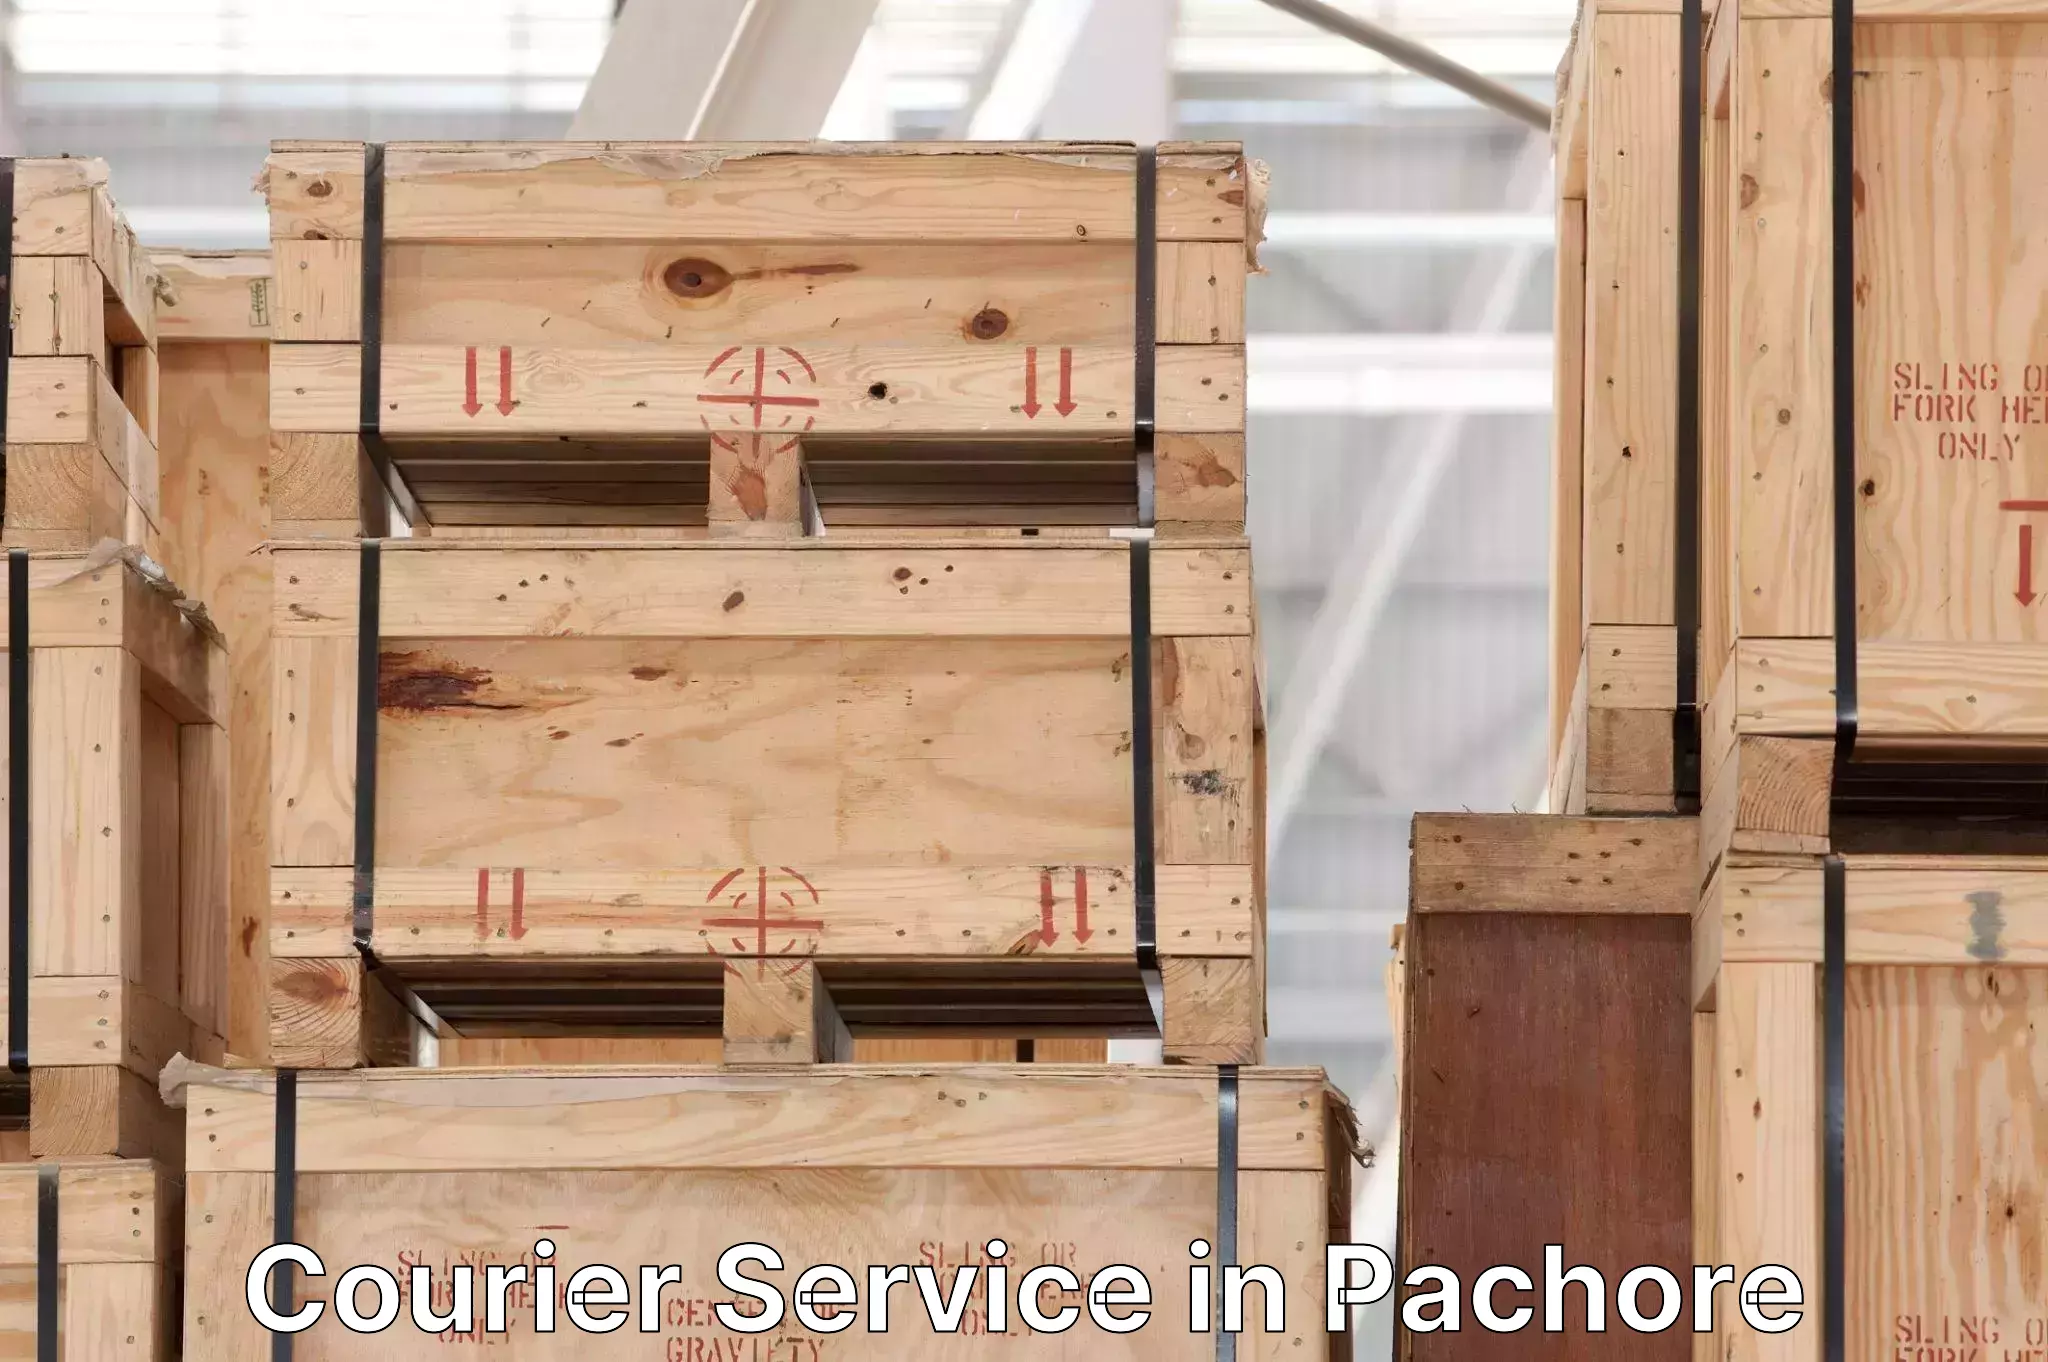 High-speed delivery in Pachore